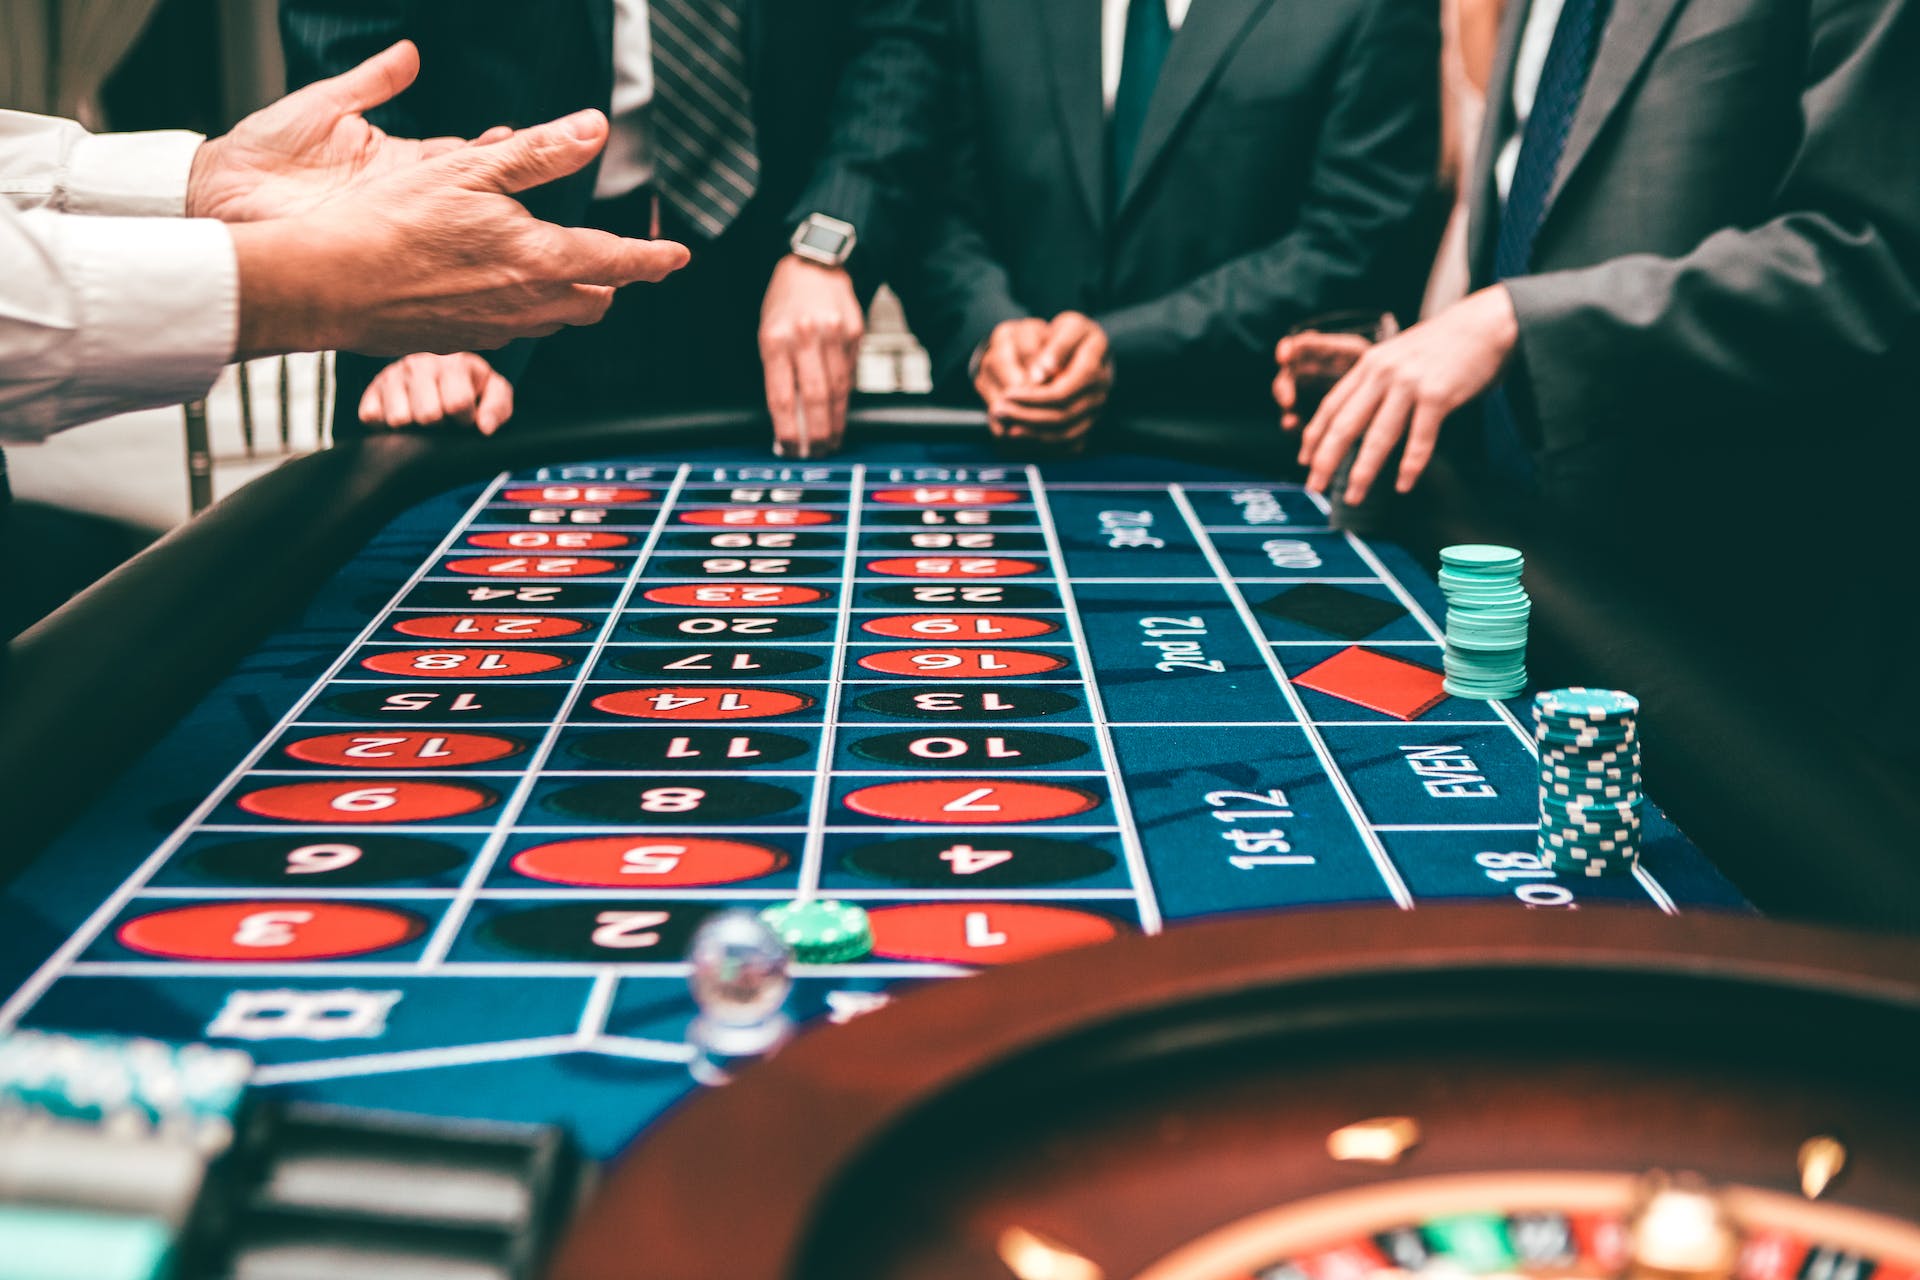 Your Possibilities Of Winning As A First-Timer In Casino Settings